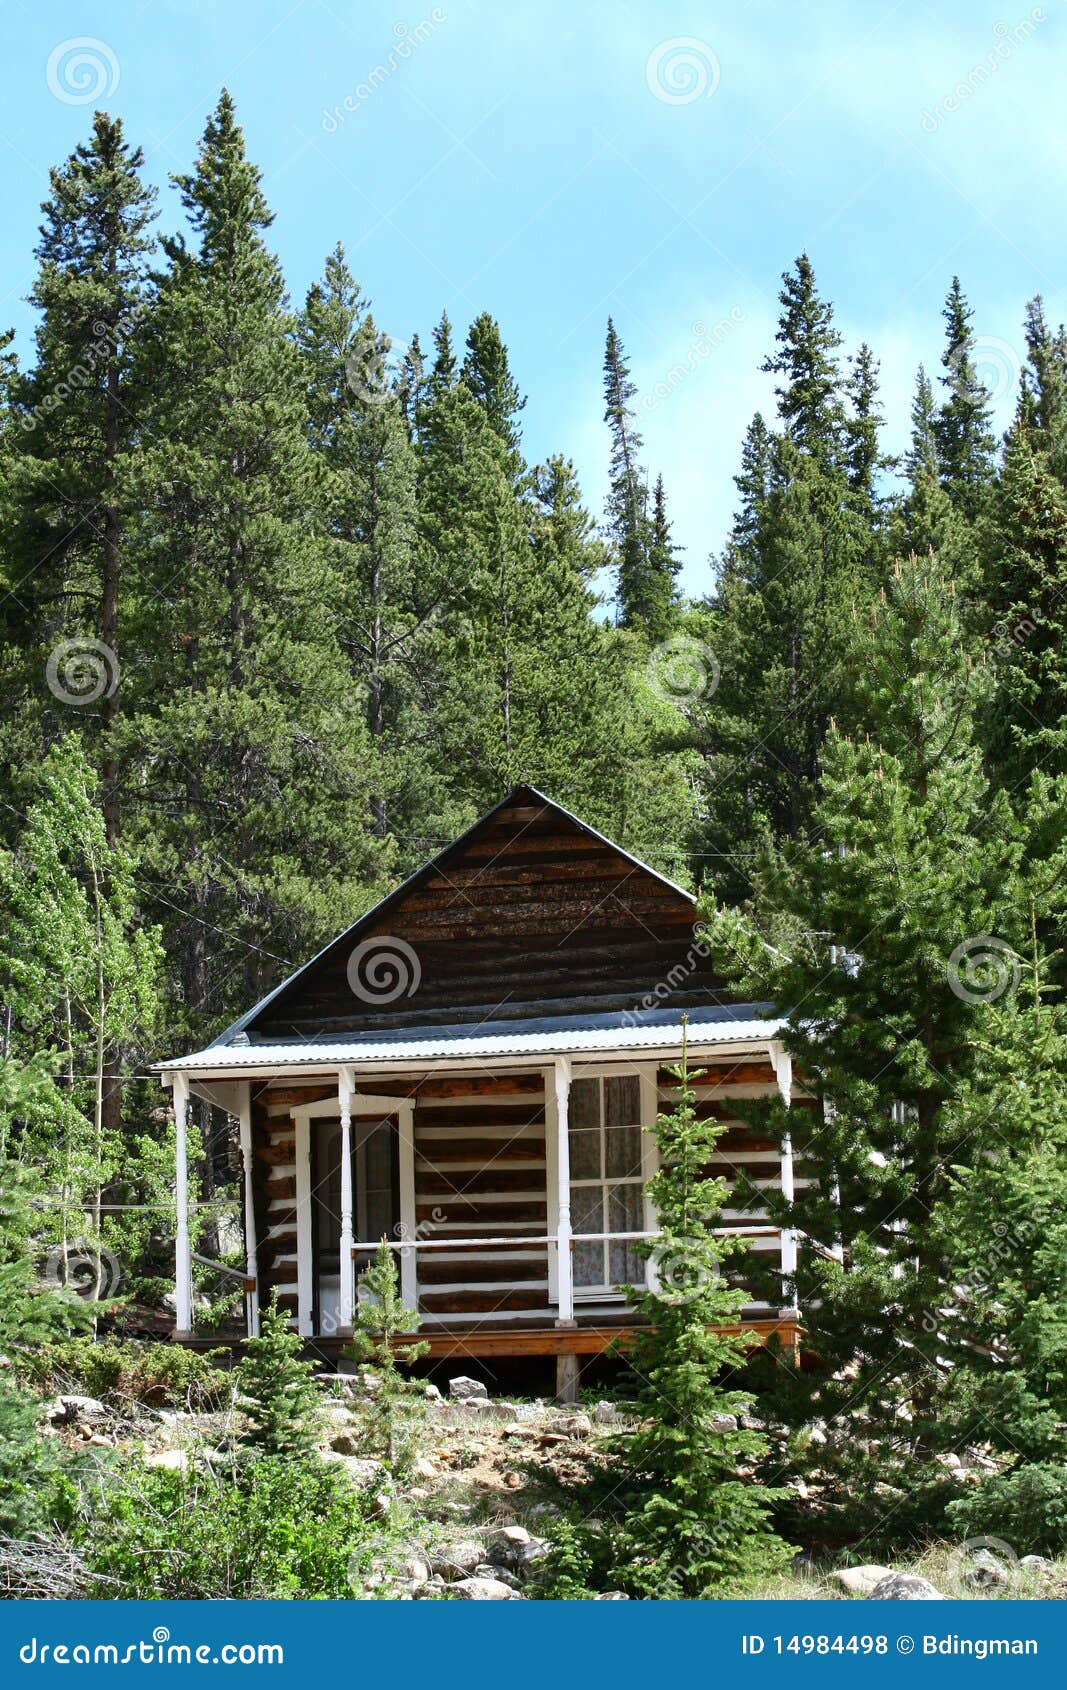 small cabin woods 14984498